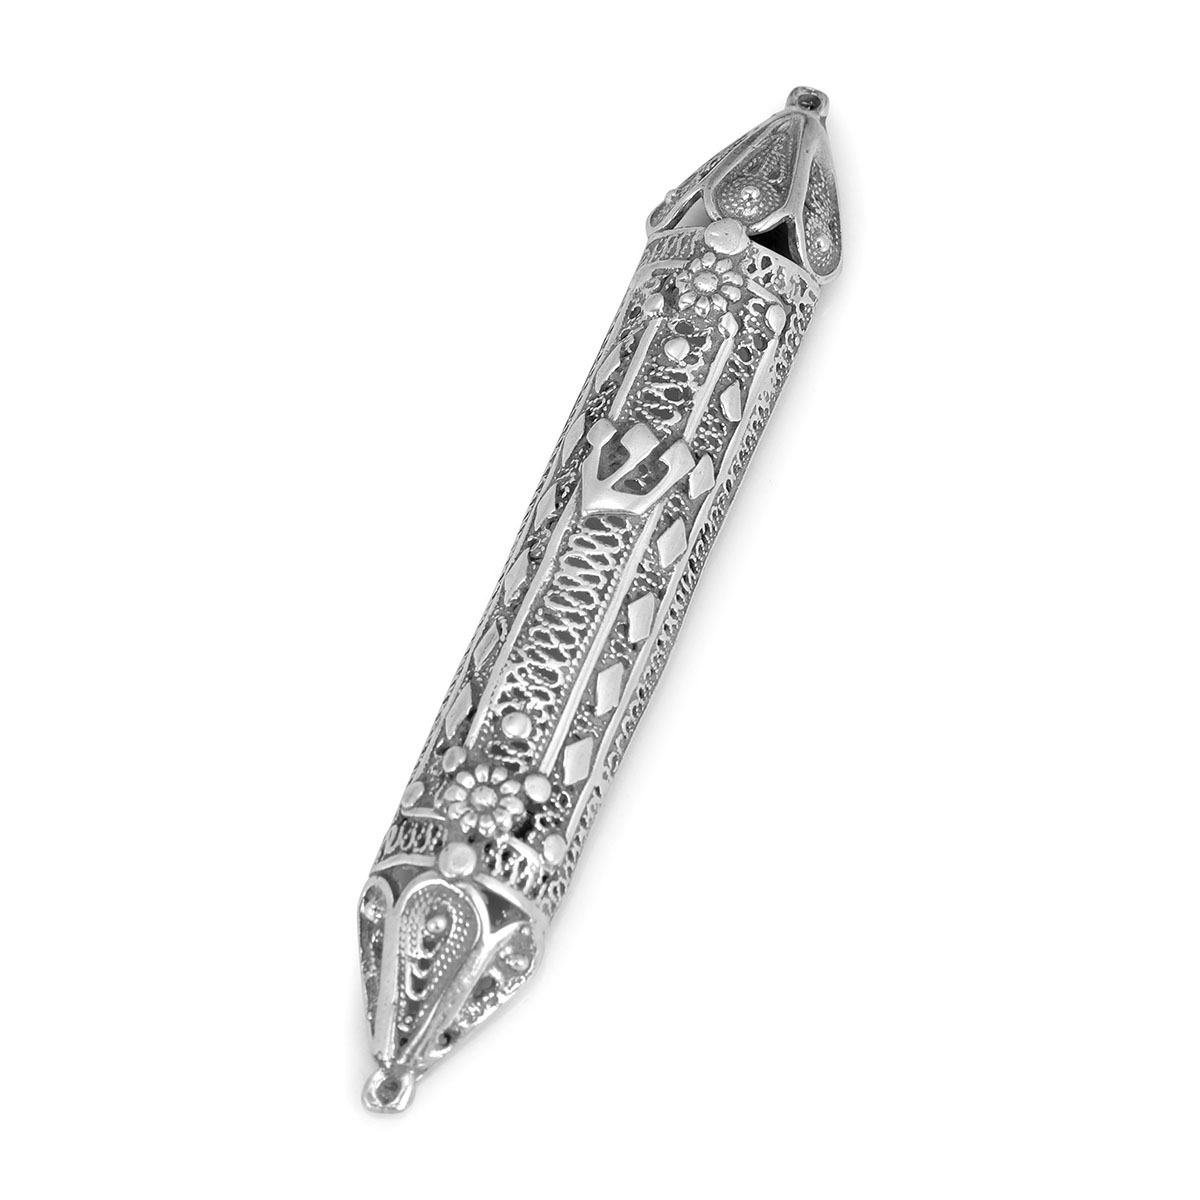 Traditional Yemenite Art Compact Handcrafted Sterling Silver Mezuzah Case With Filigree Design - 1